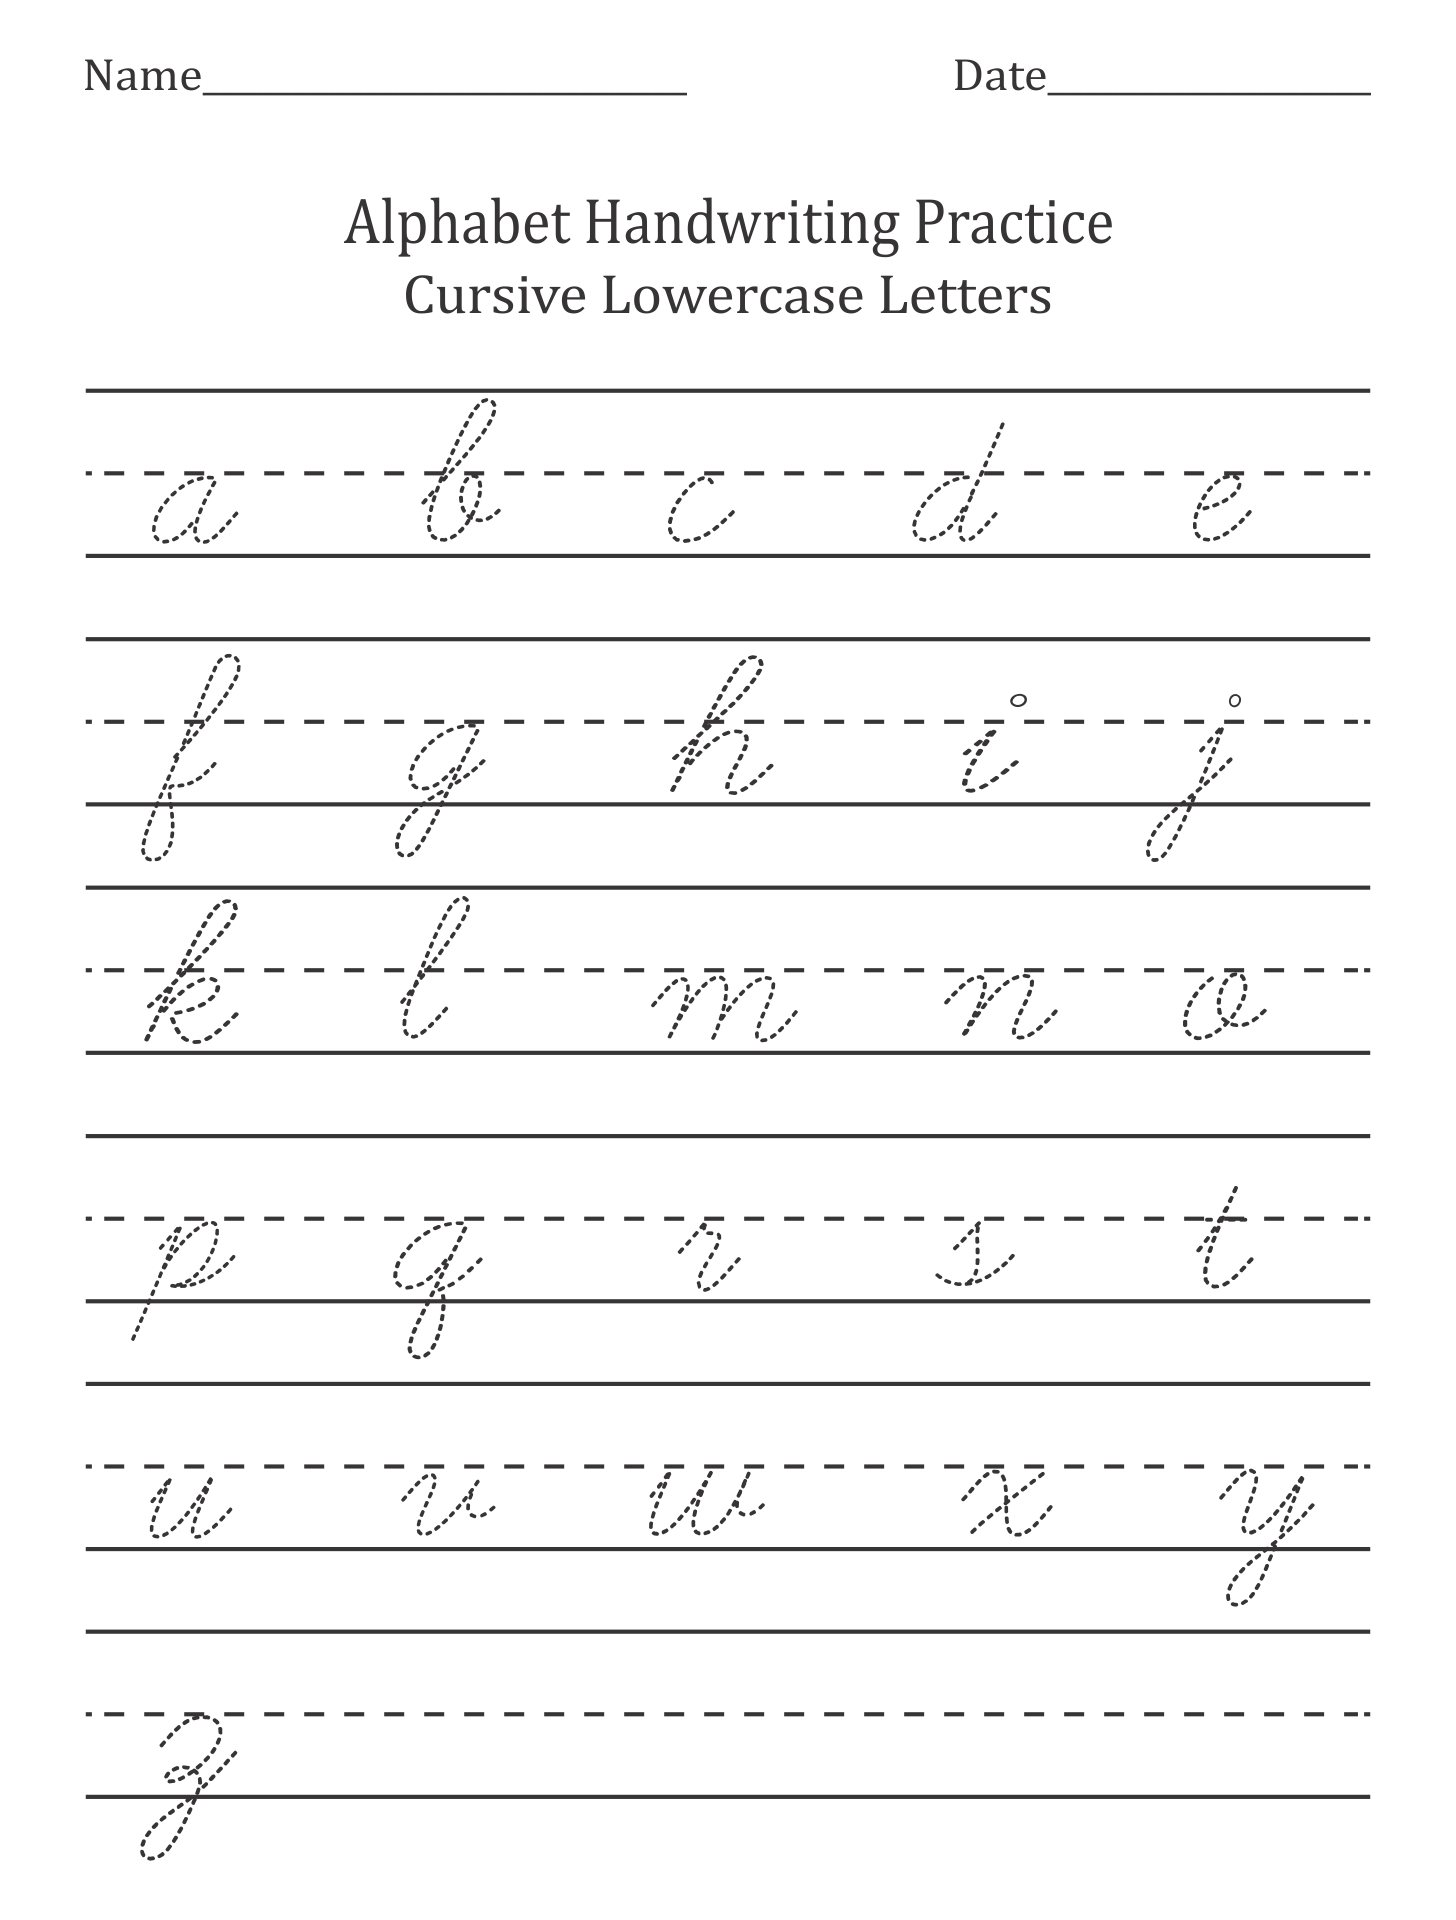 free-handwriting-worksheets-for-adults-printable-form-templates-and